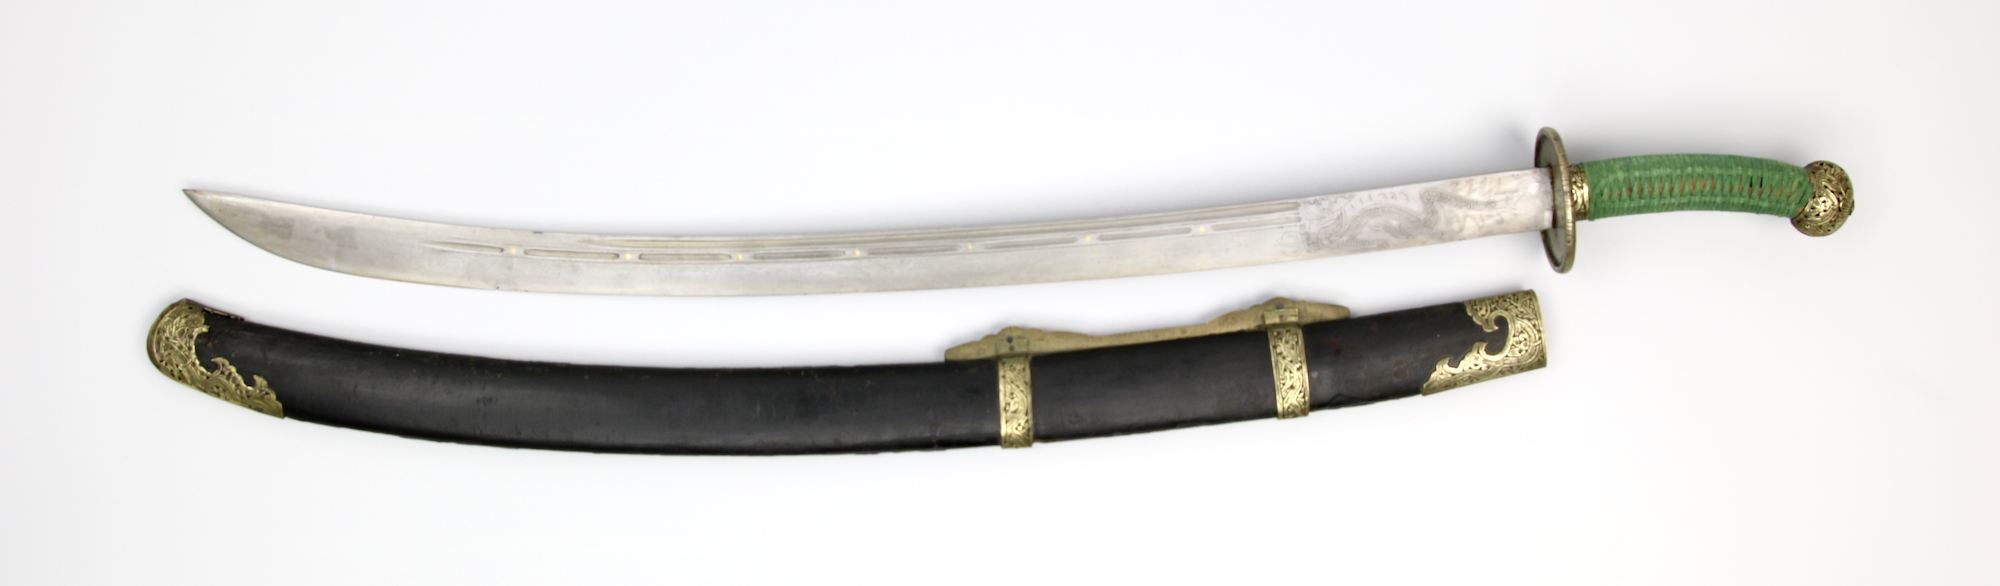 A Chinese saber with piandao style blade